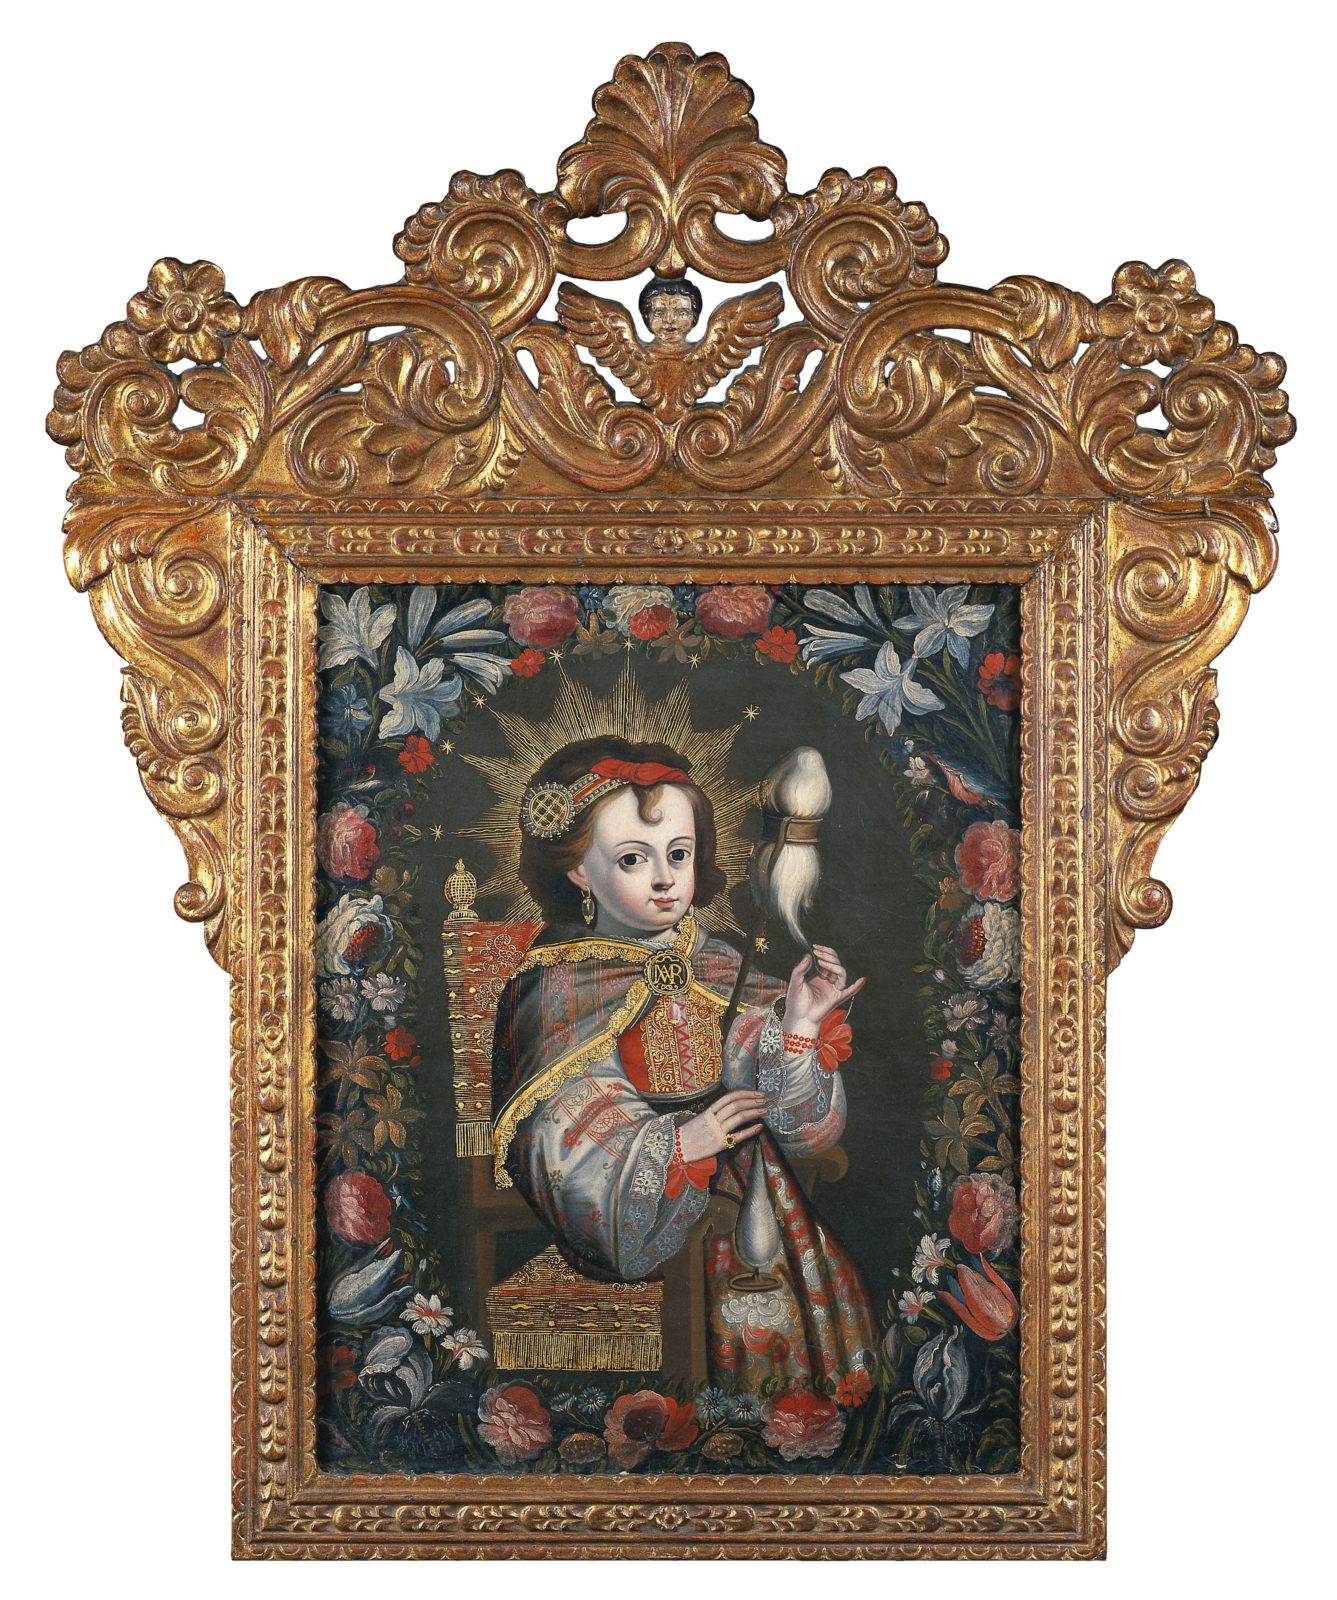 A painting depicting the Virgin Mary as a child, sitting on a friar's chair spinning fiber into thread. She is surrounded by a frame of flowers.